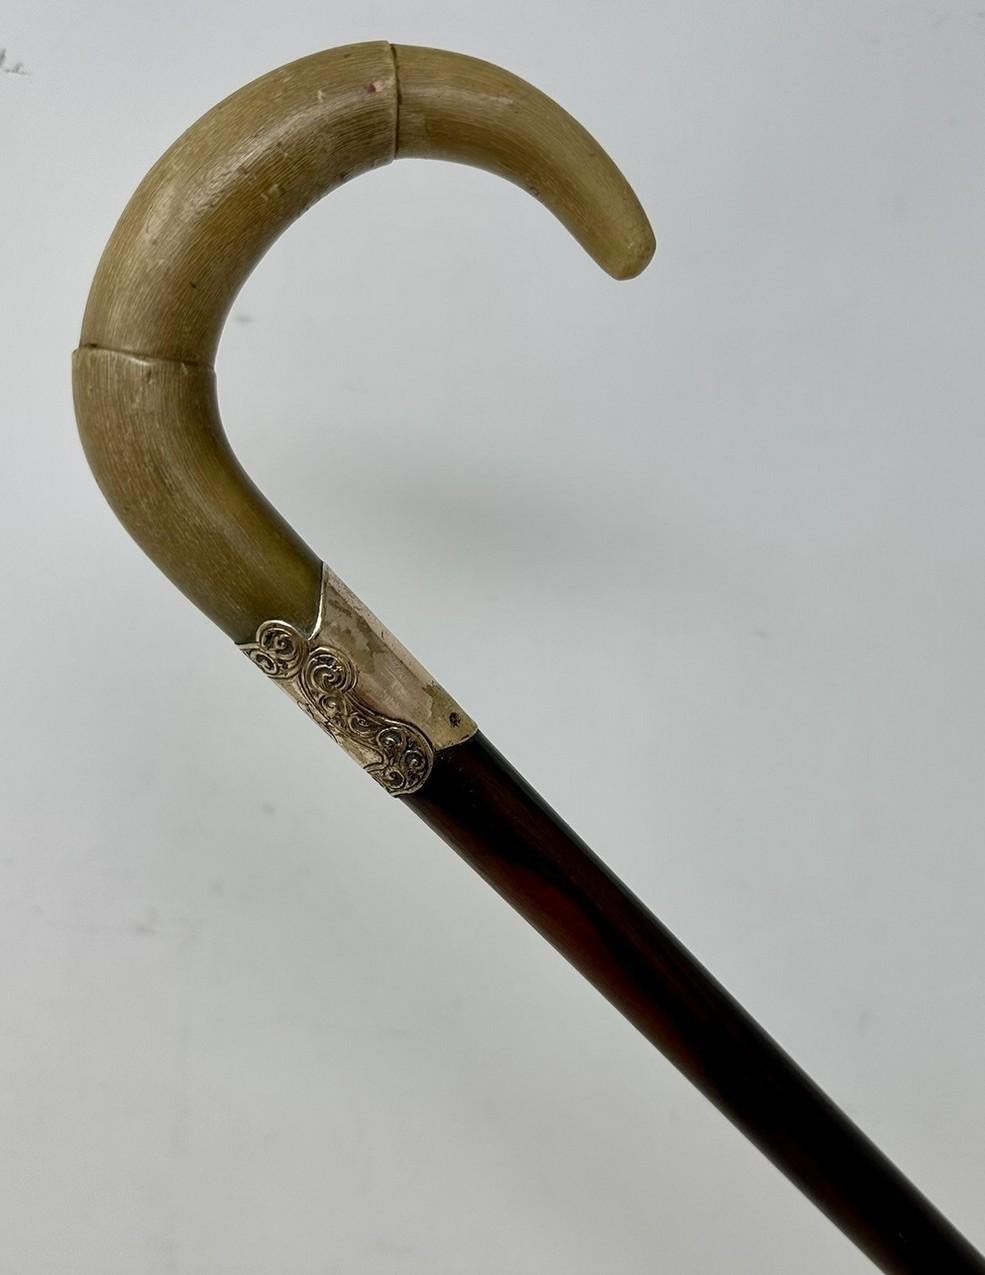 Antique Vintage English Walking Stick Cane Wooden Gold Plated Cow Horn Handle  In Good Condition For Sale In Dublin, Ireland